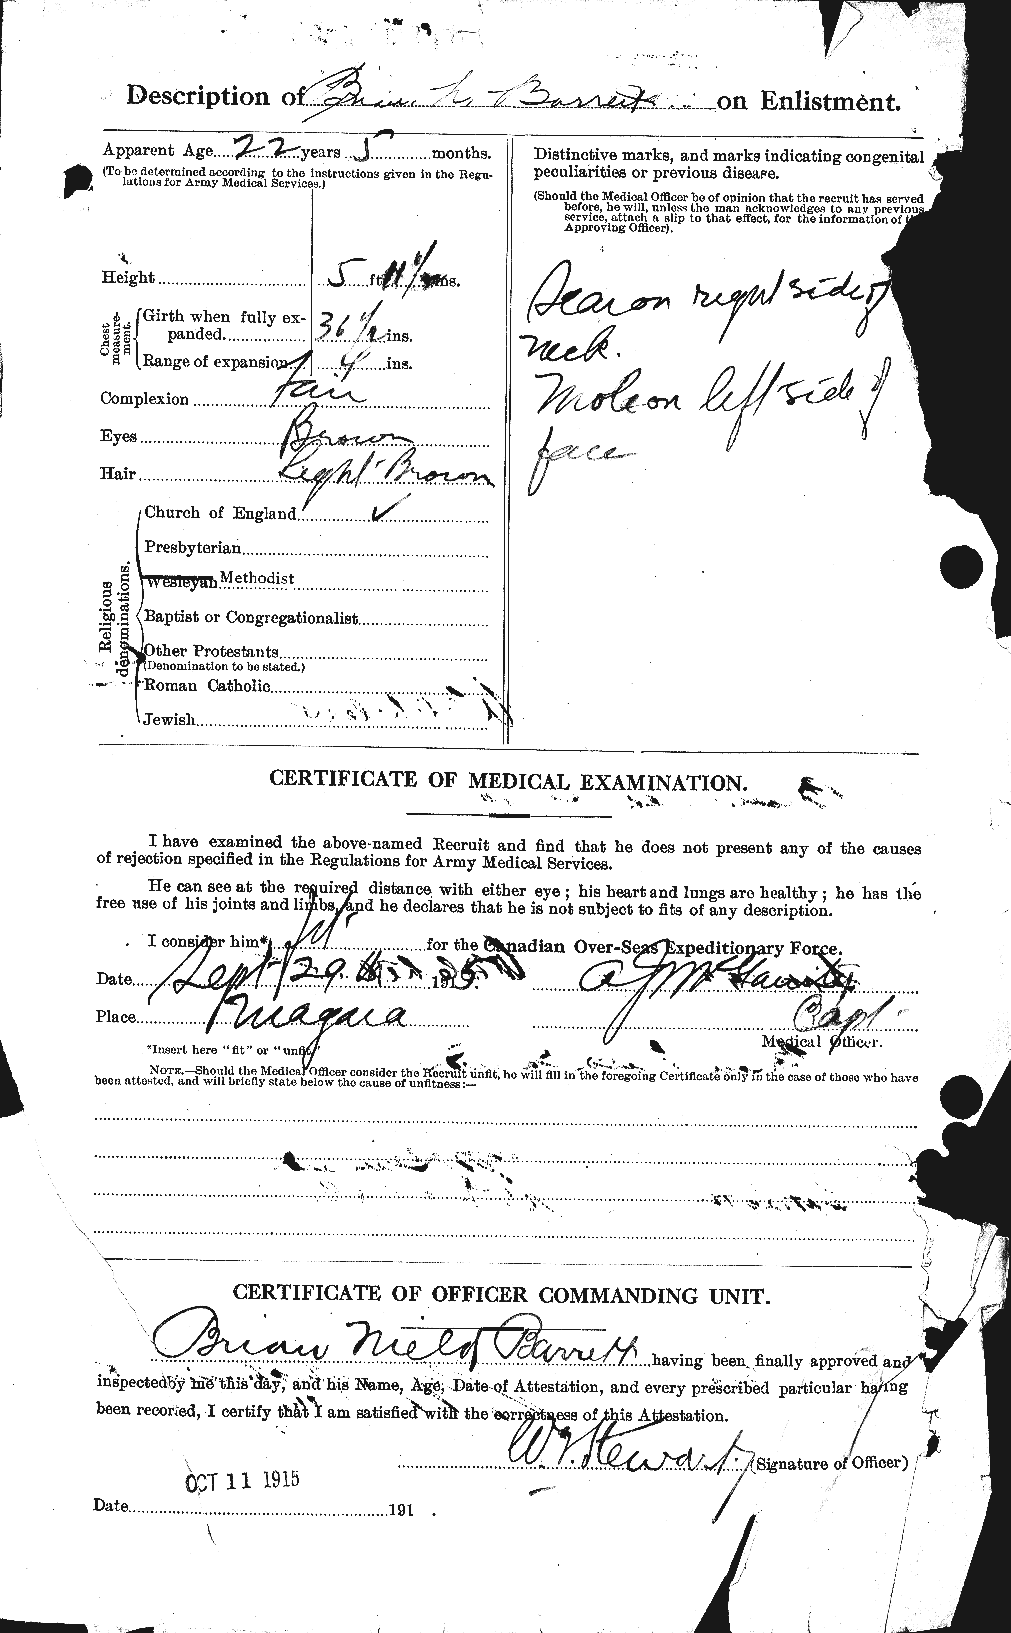 Personnel Records of the First World War - CEF 222236b